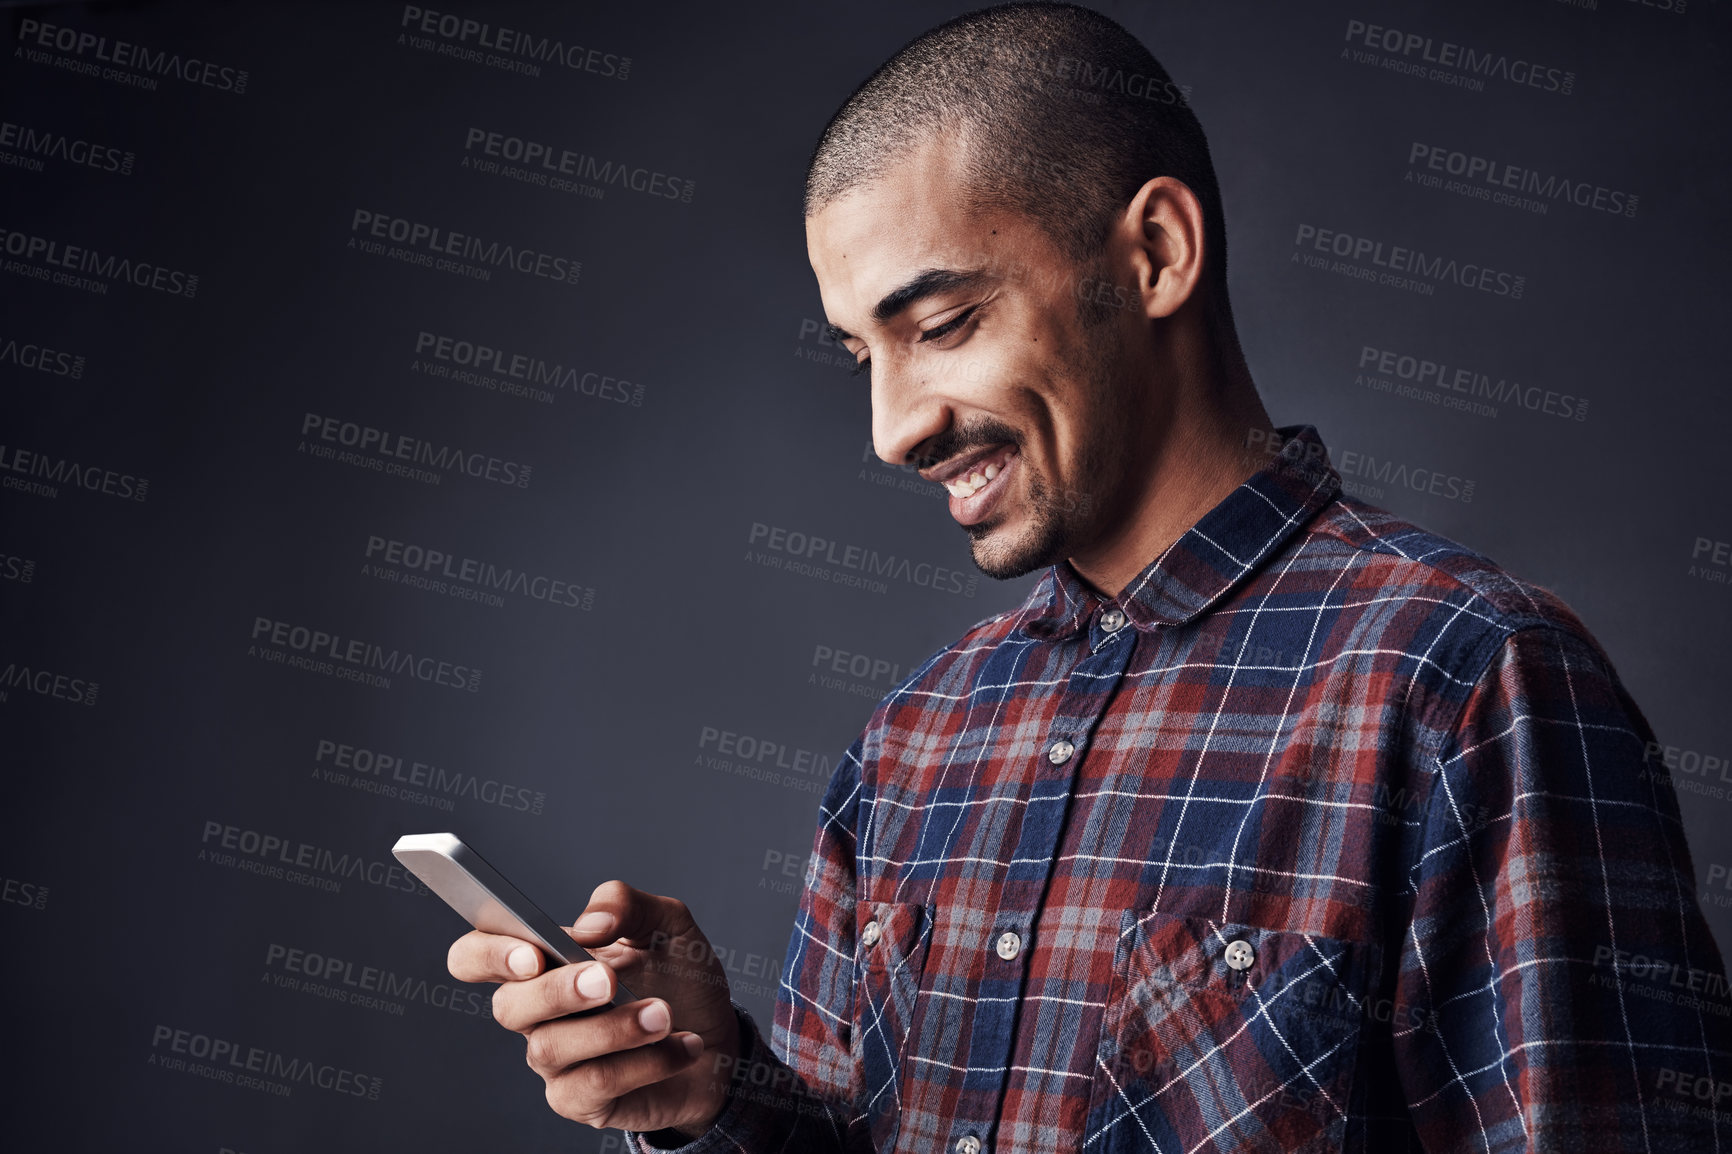 Buy stock photo Studio shot of a young man texting on a cellphone against a dark background